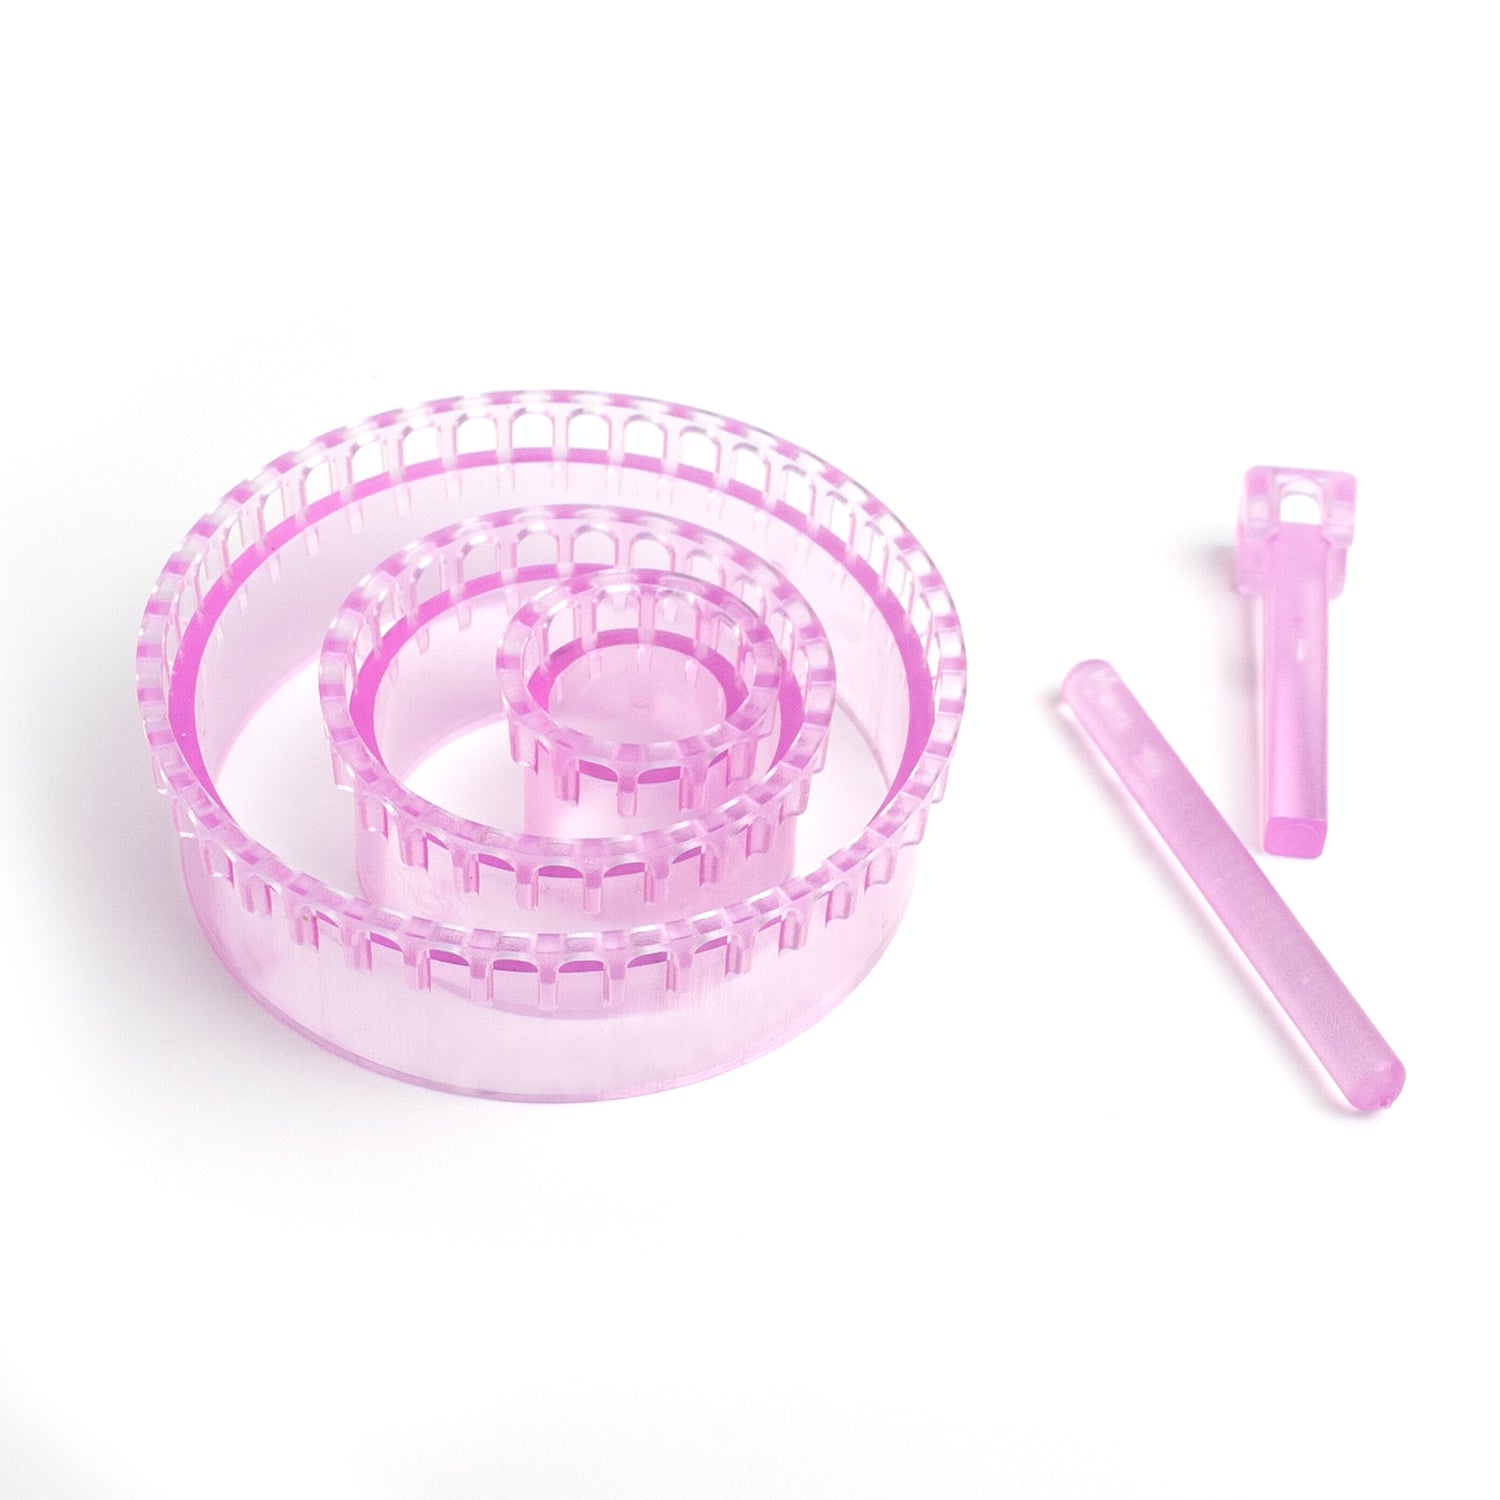 Wire crochet looms set - invisible spool knitting starter set